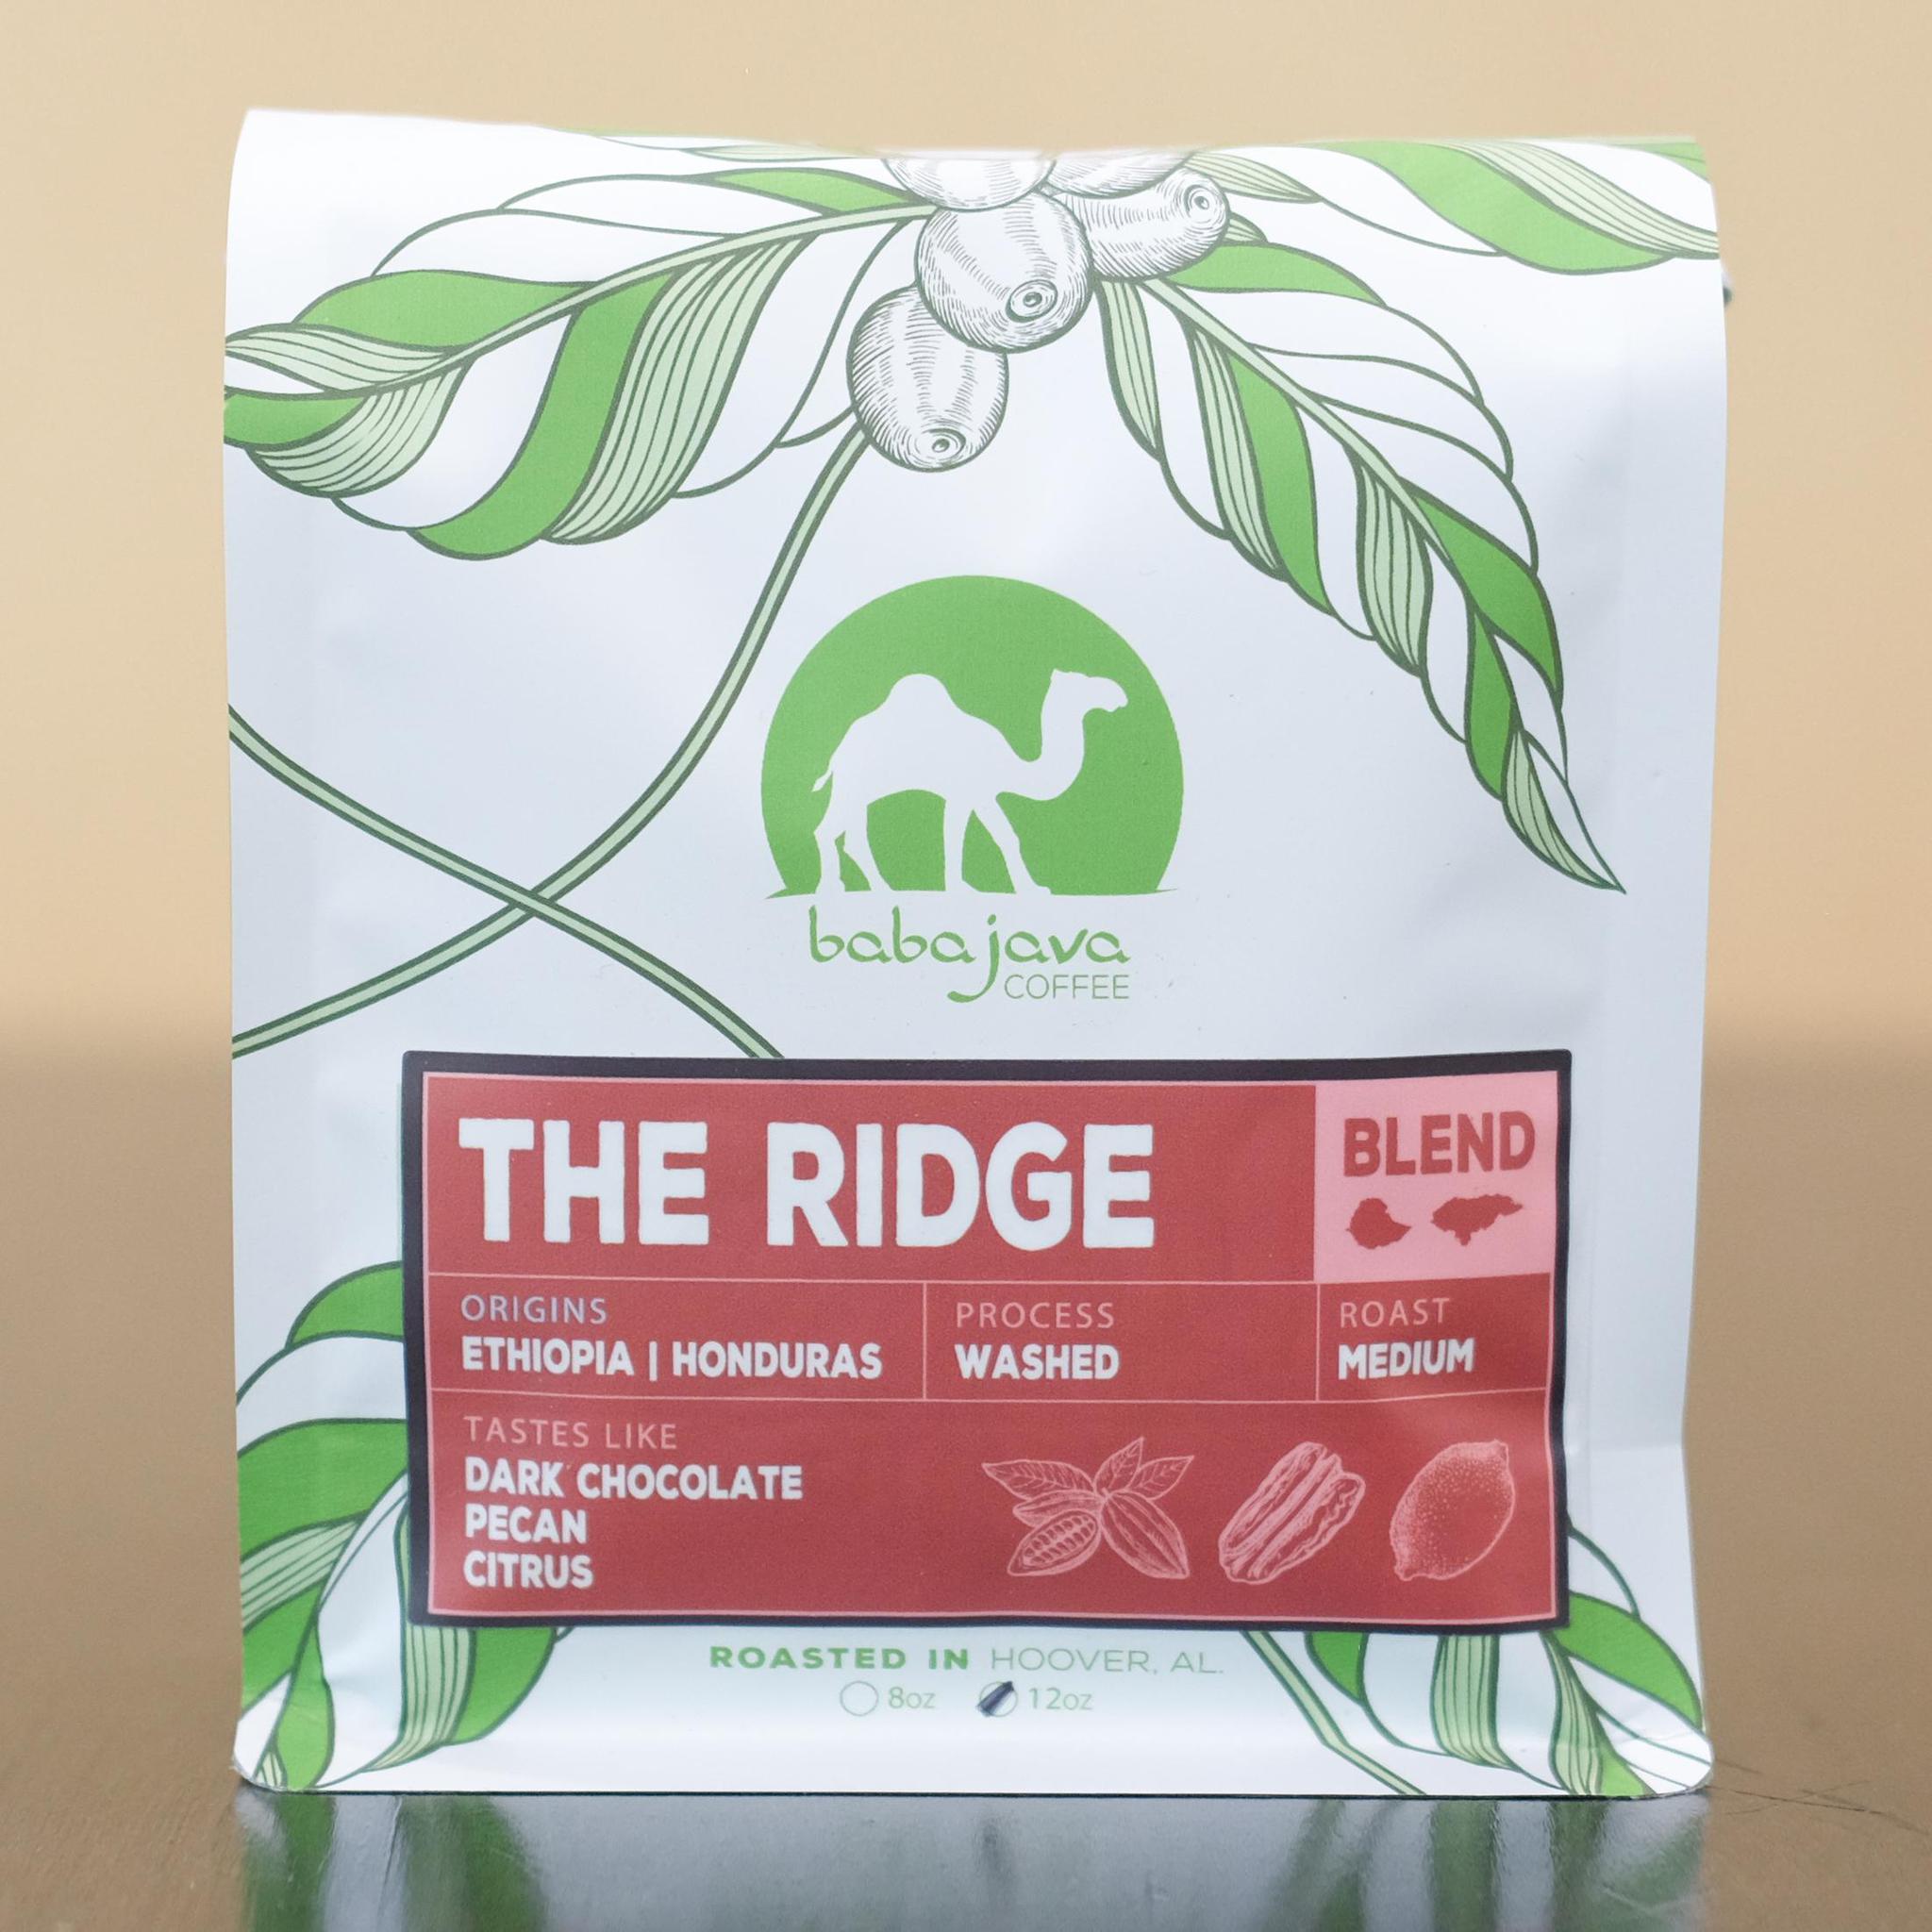 A bag of coffee with a red label that reads The Ridge Blend. The bag has a drawing of a coffee plant and the Baba Java Coffee logo.